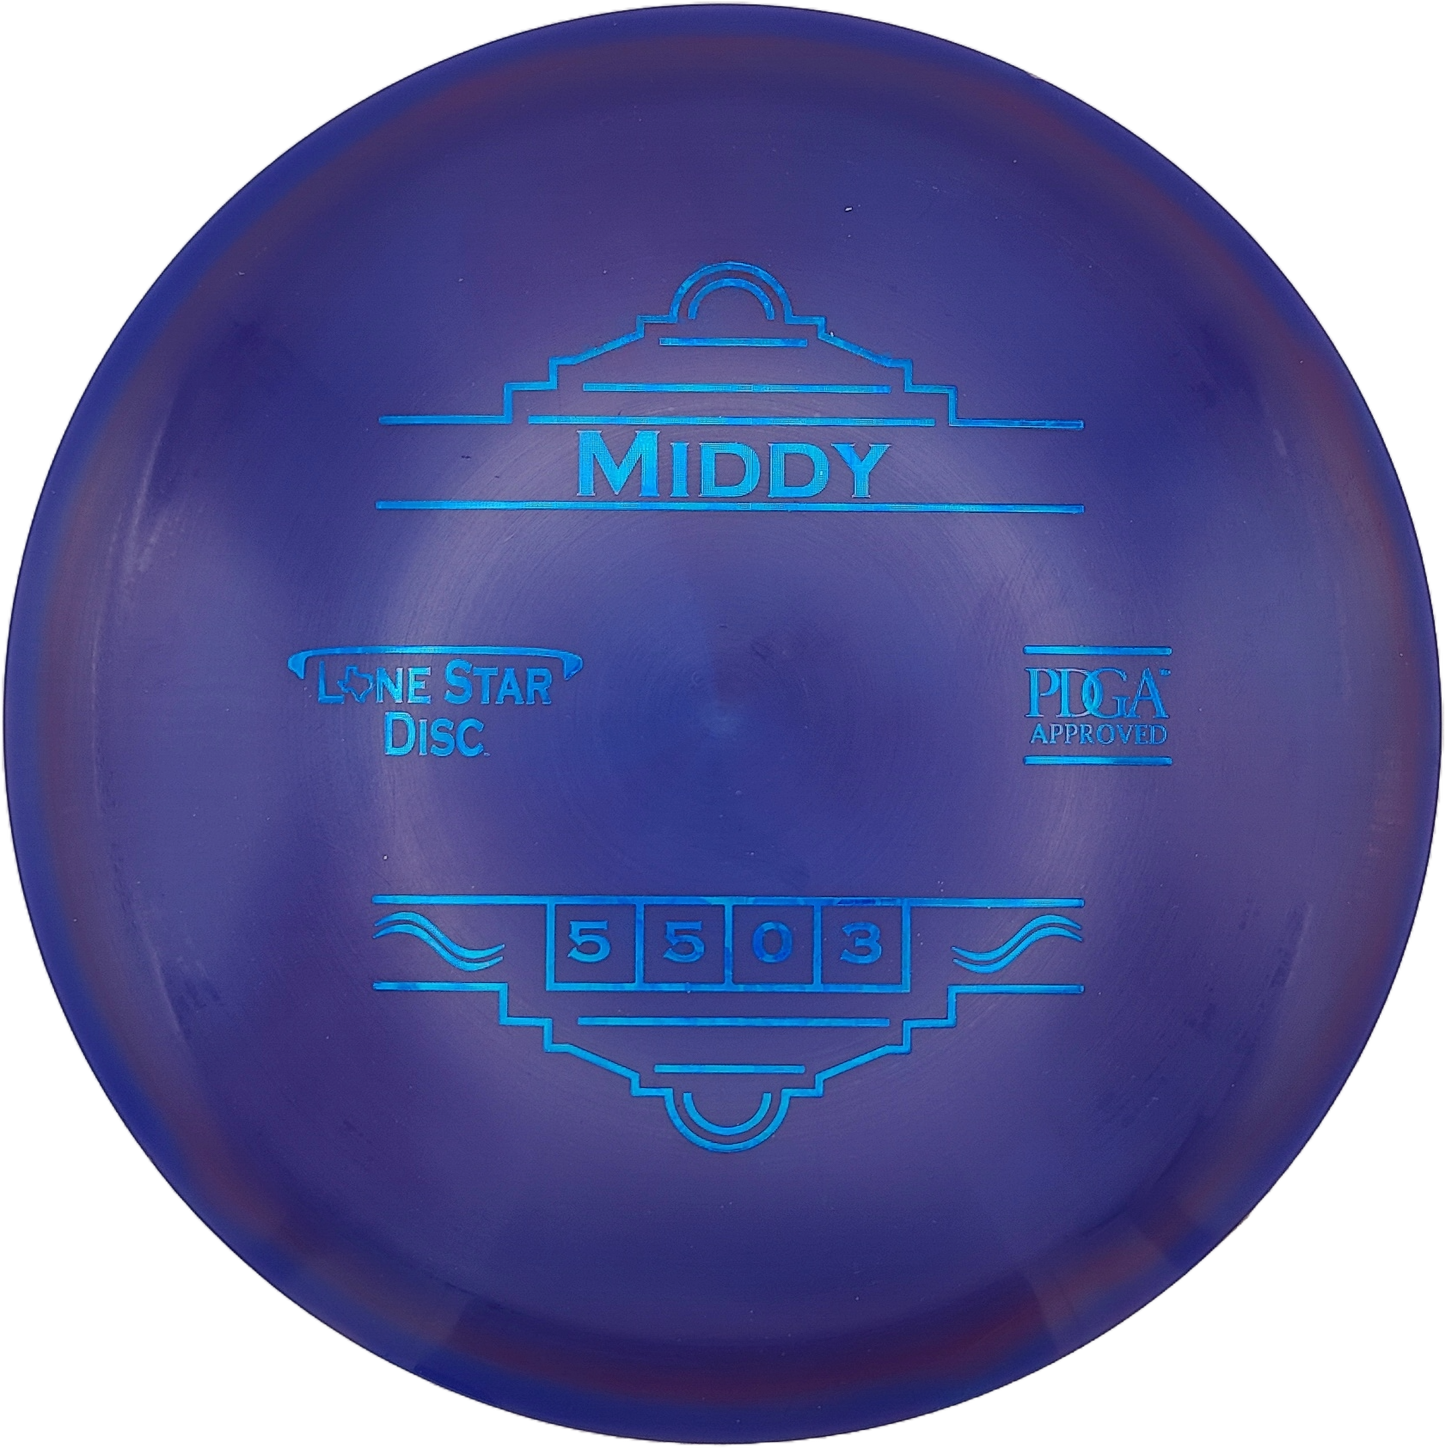 Lone Star Disc The Middy Alpha